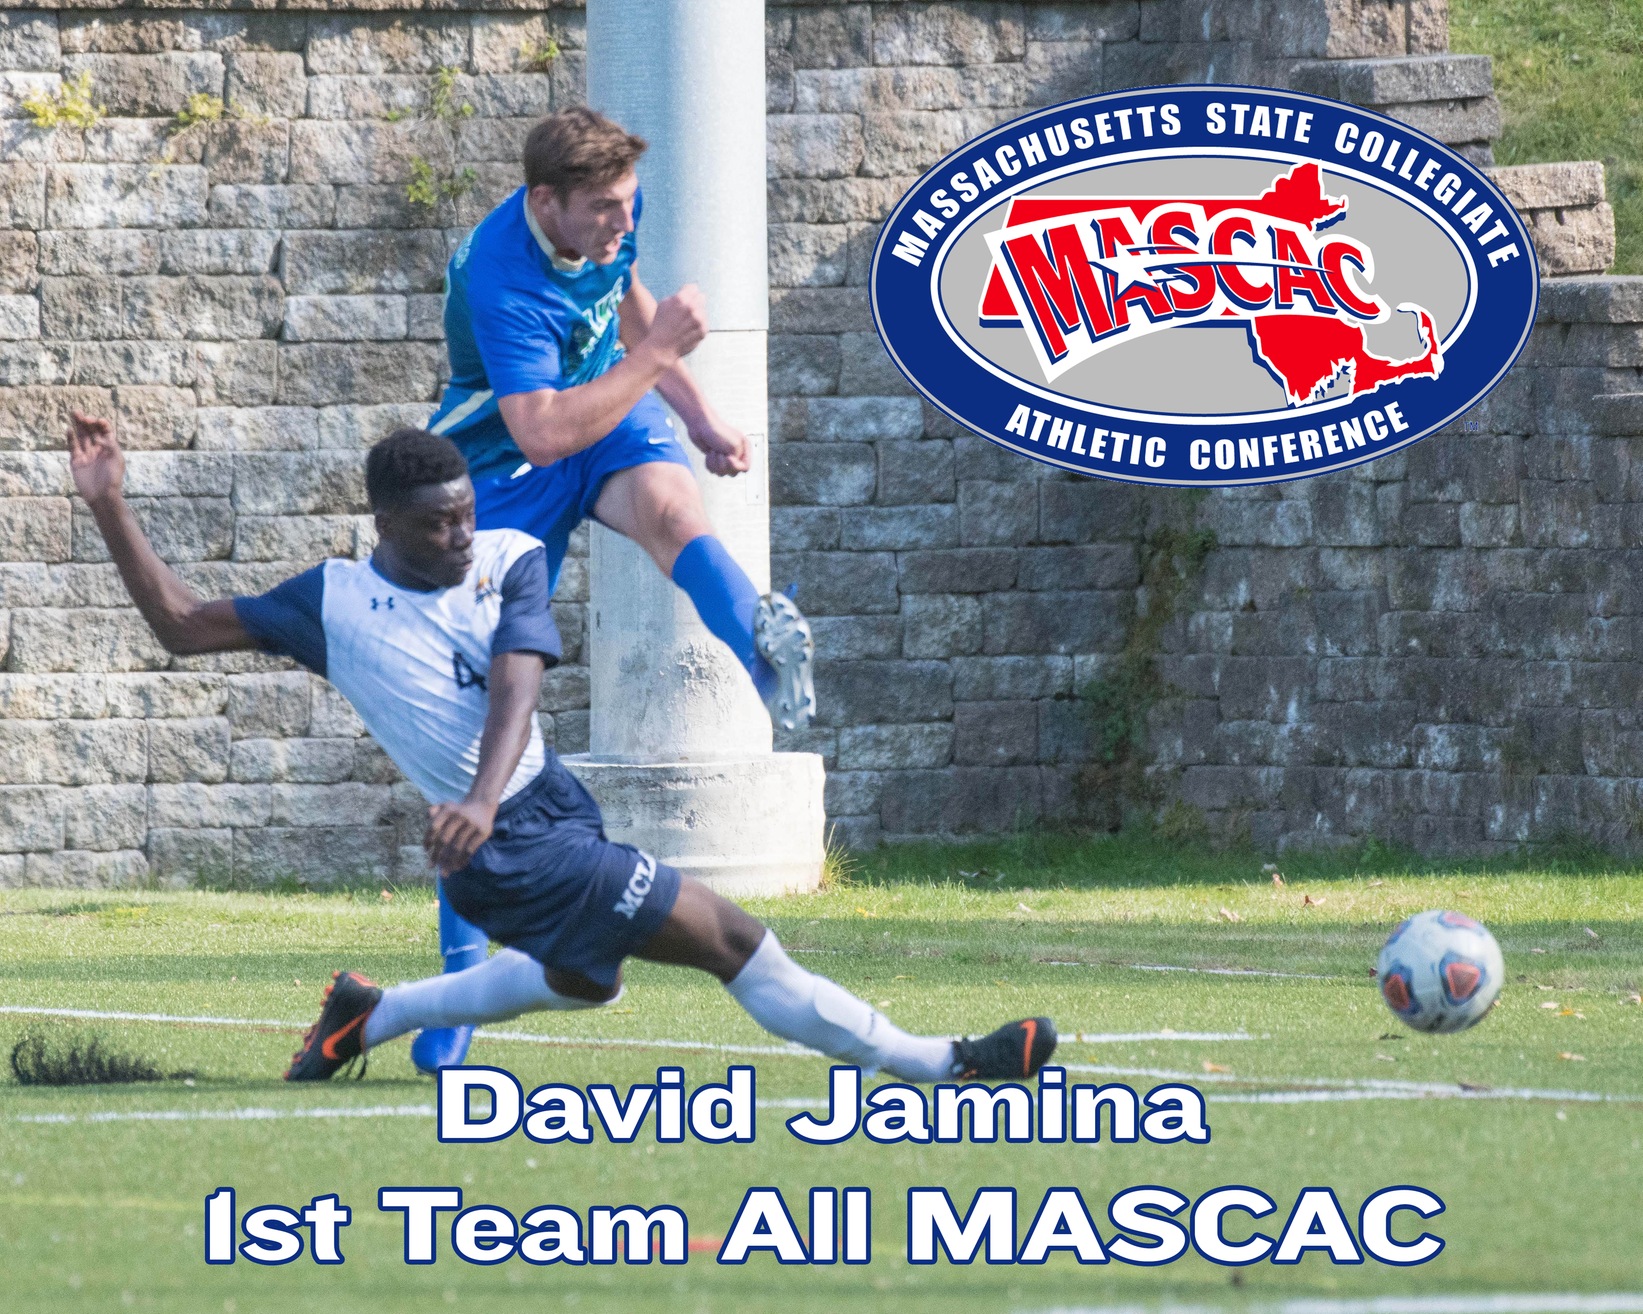 Jamina collects first team All MASCAC honors